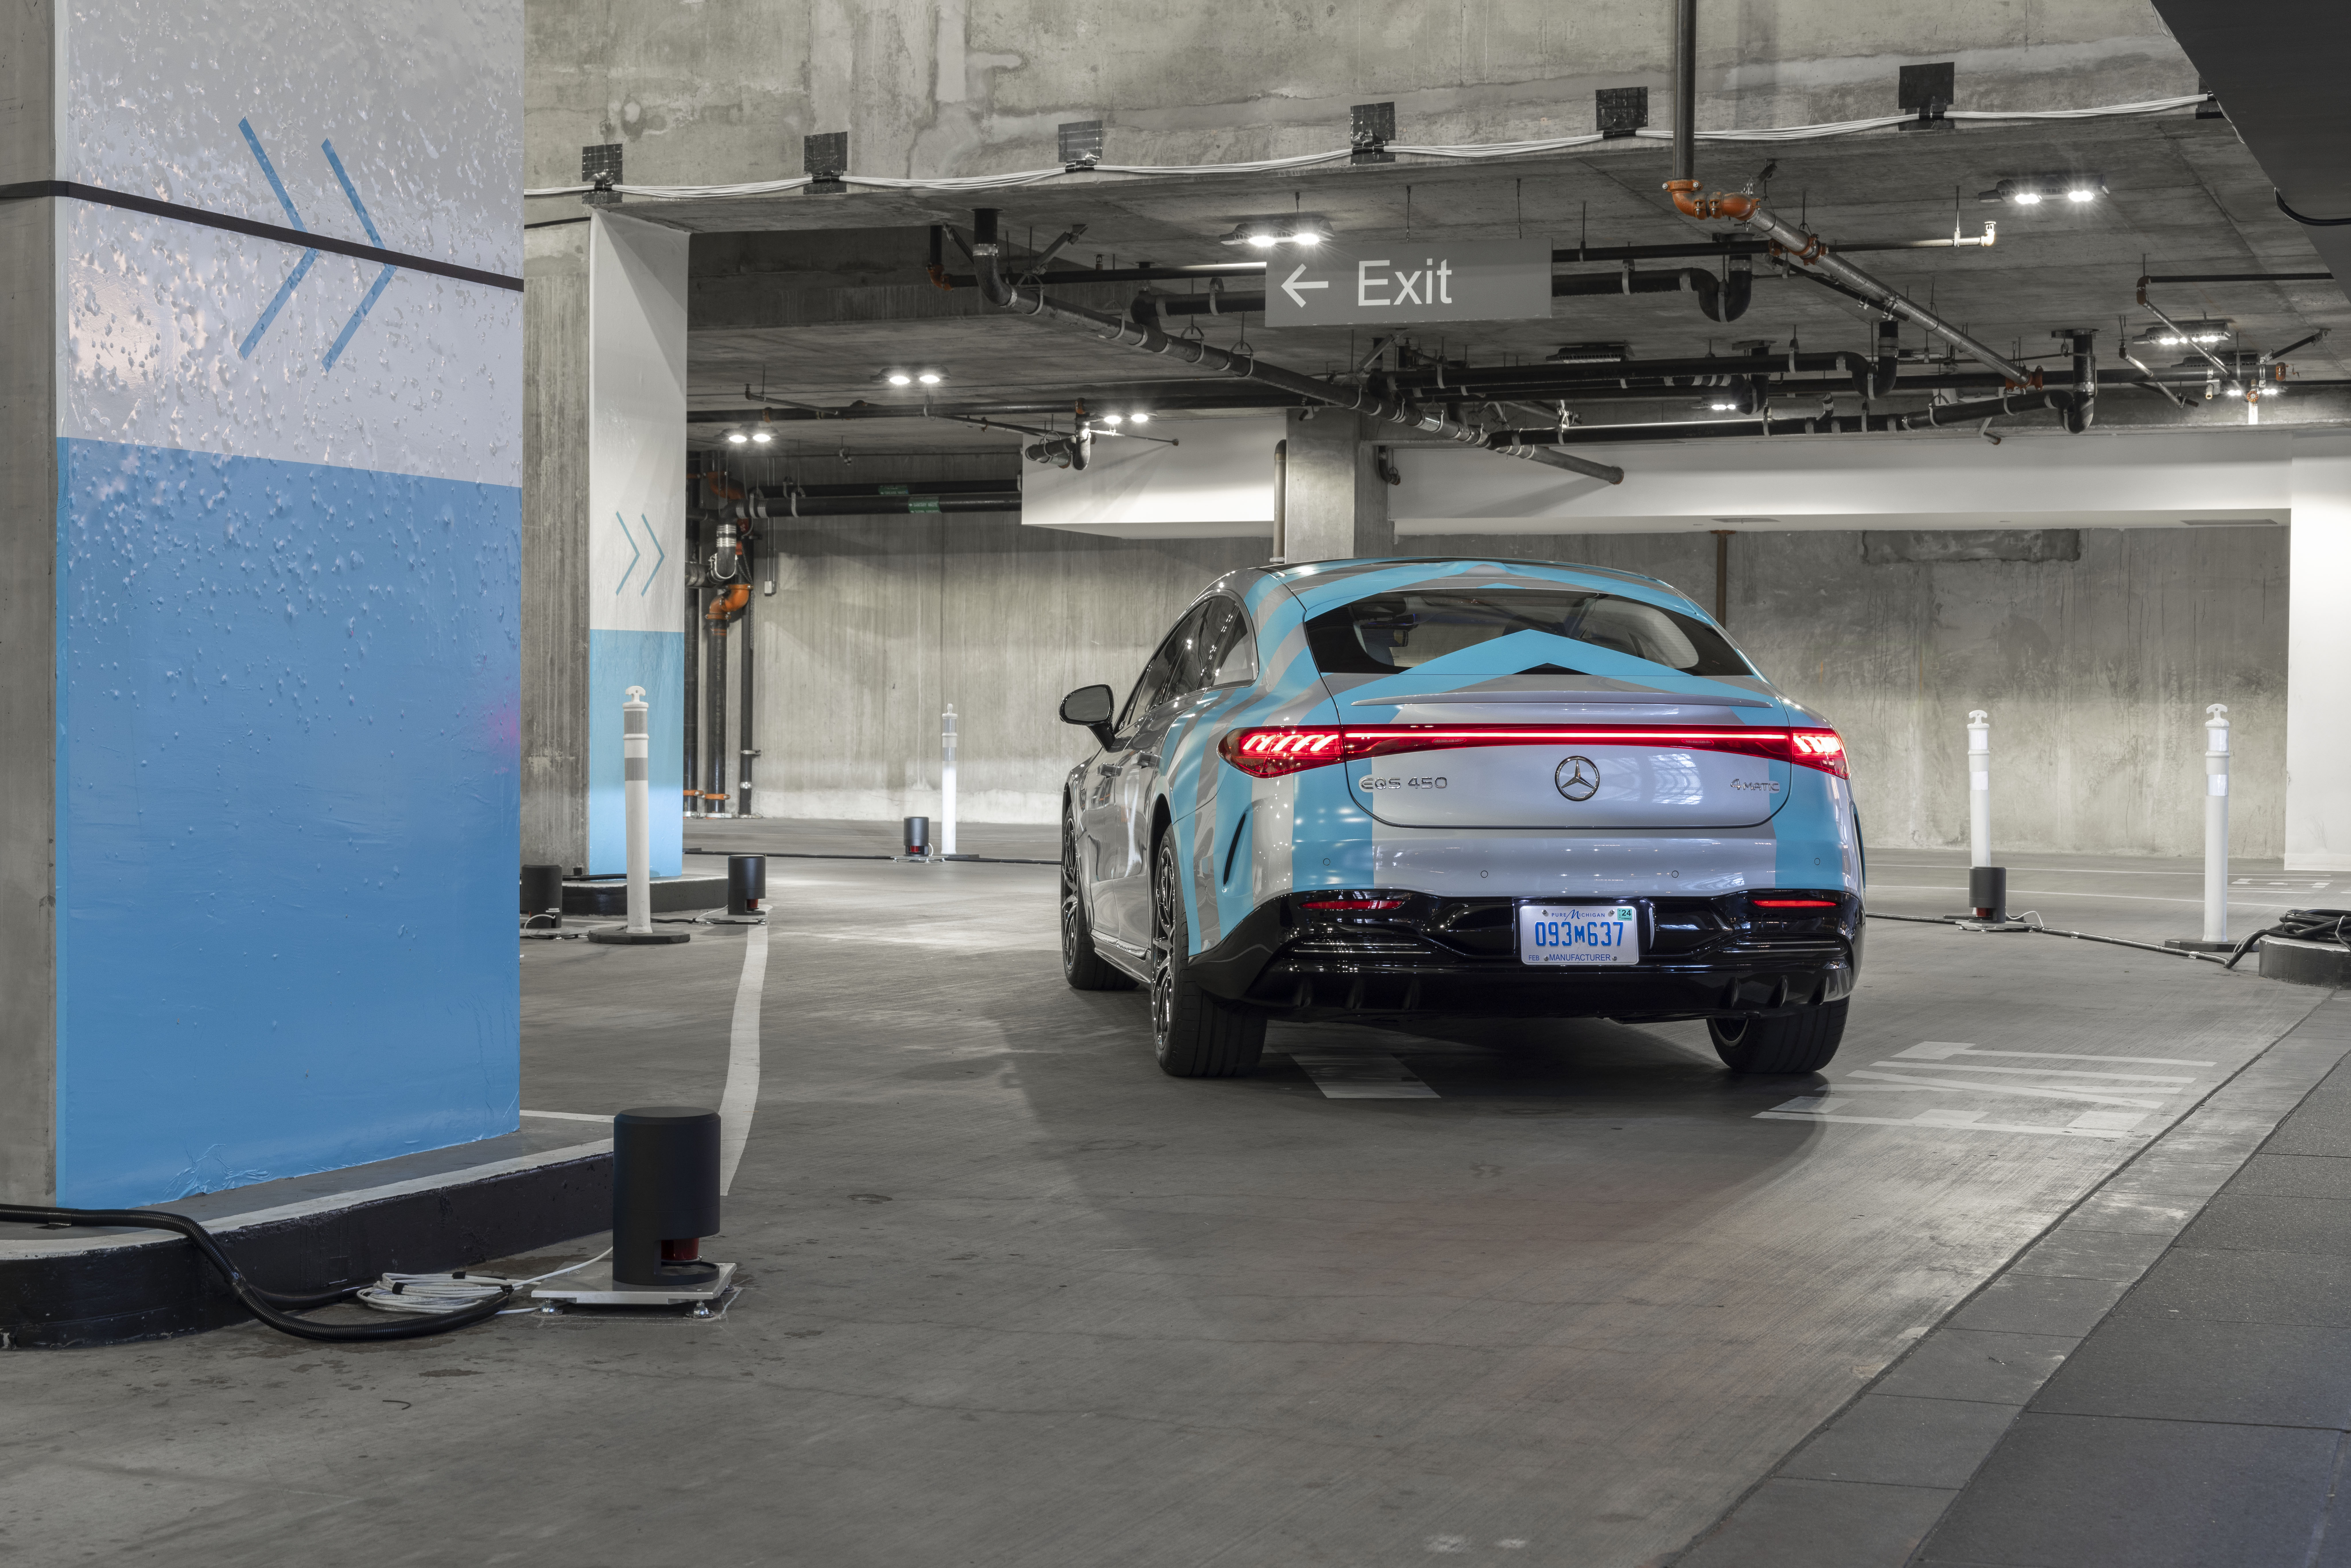 Bosch and Mercedes-Benz showcase automated valet parking at InterContinental Los Angeles Downtown hotel 